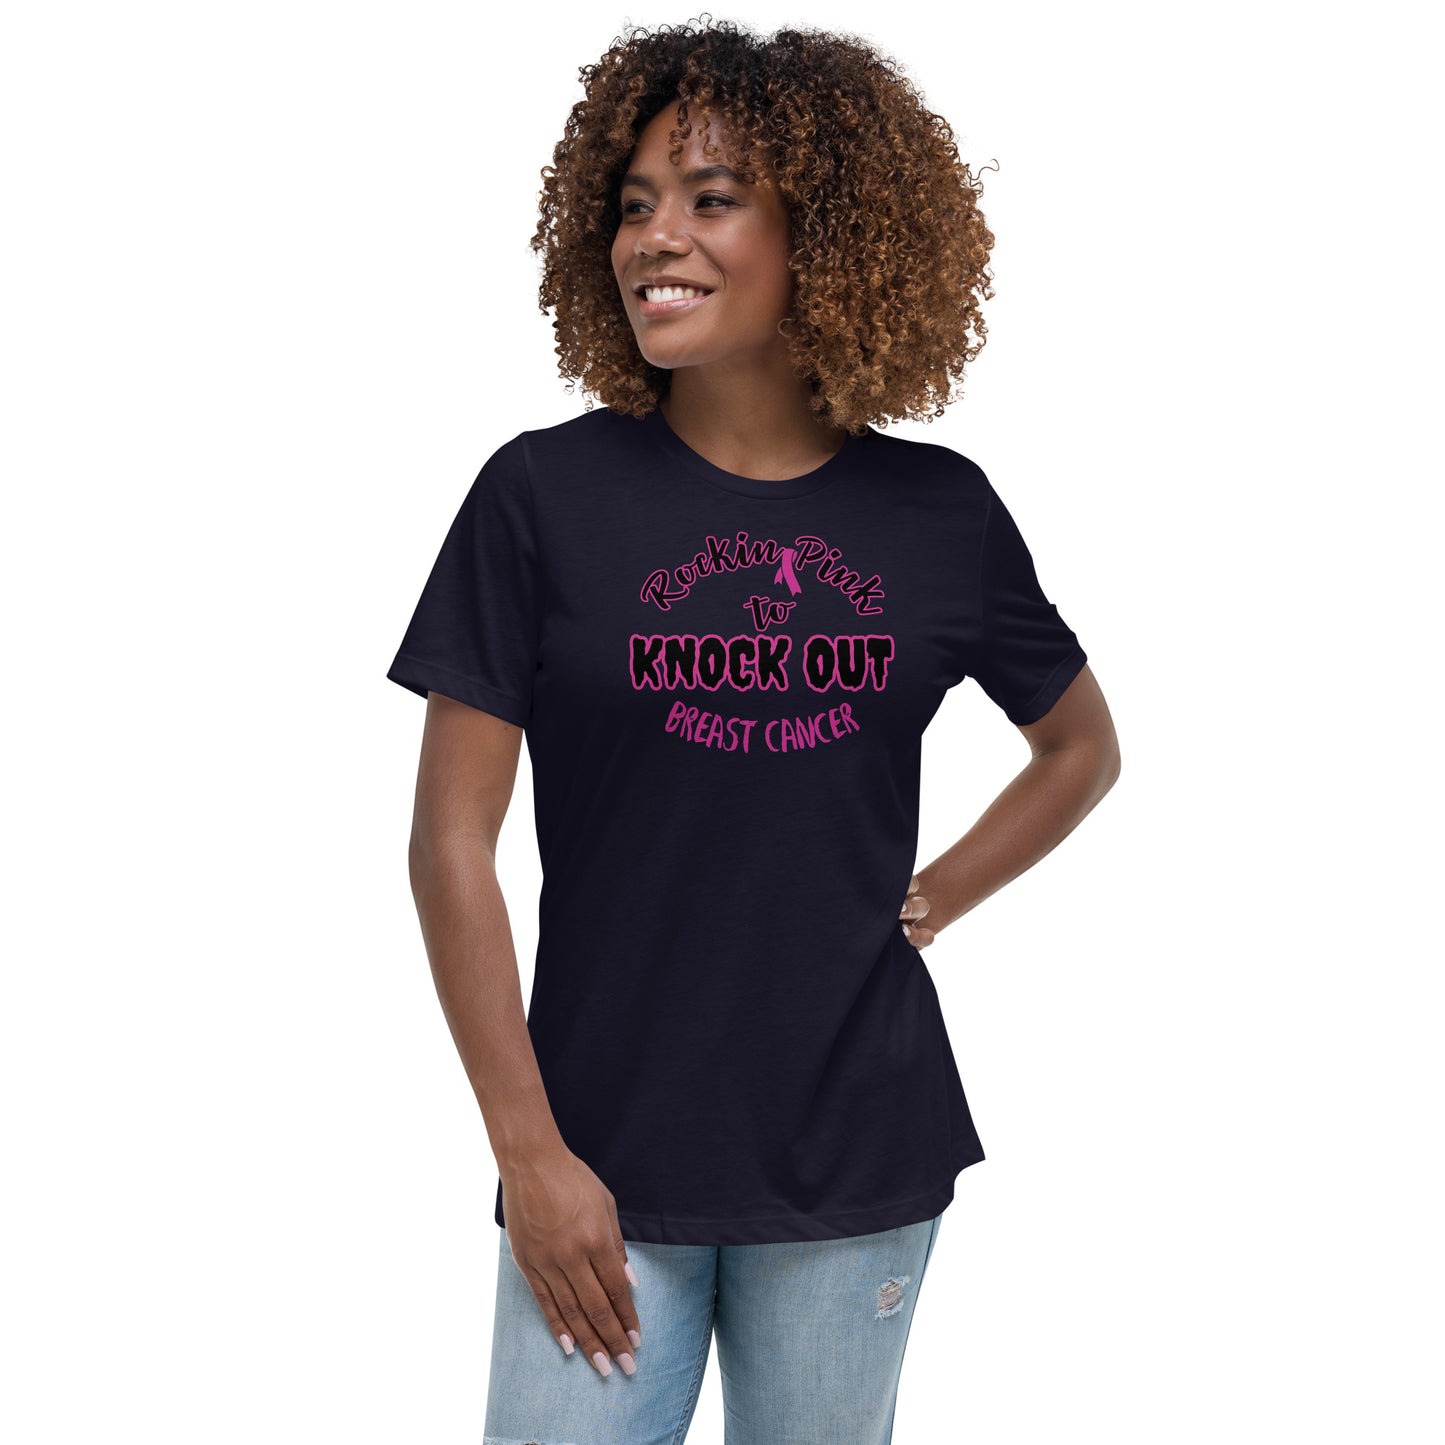 Knock Out Cancer Cotton Tee